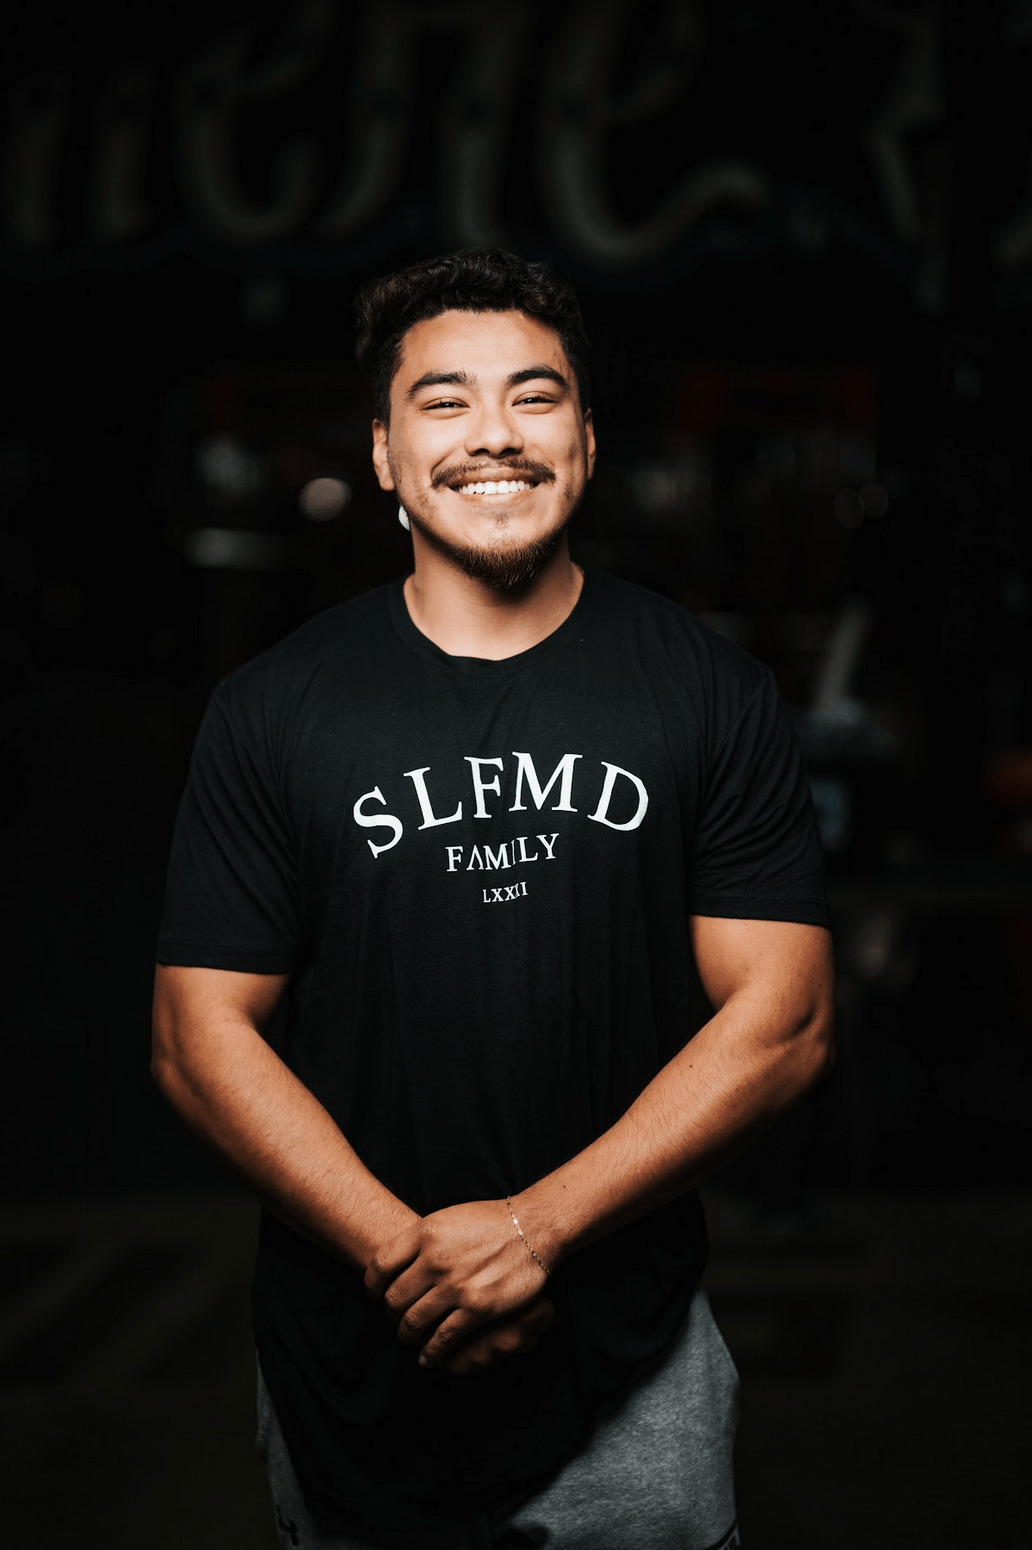 My name is Alex Aguilar and I have been a professional trainer for 3 years. i am Strength and Conditioning coach / Sports Performance Specialist and Nutrition Specialist.